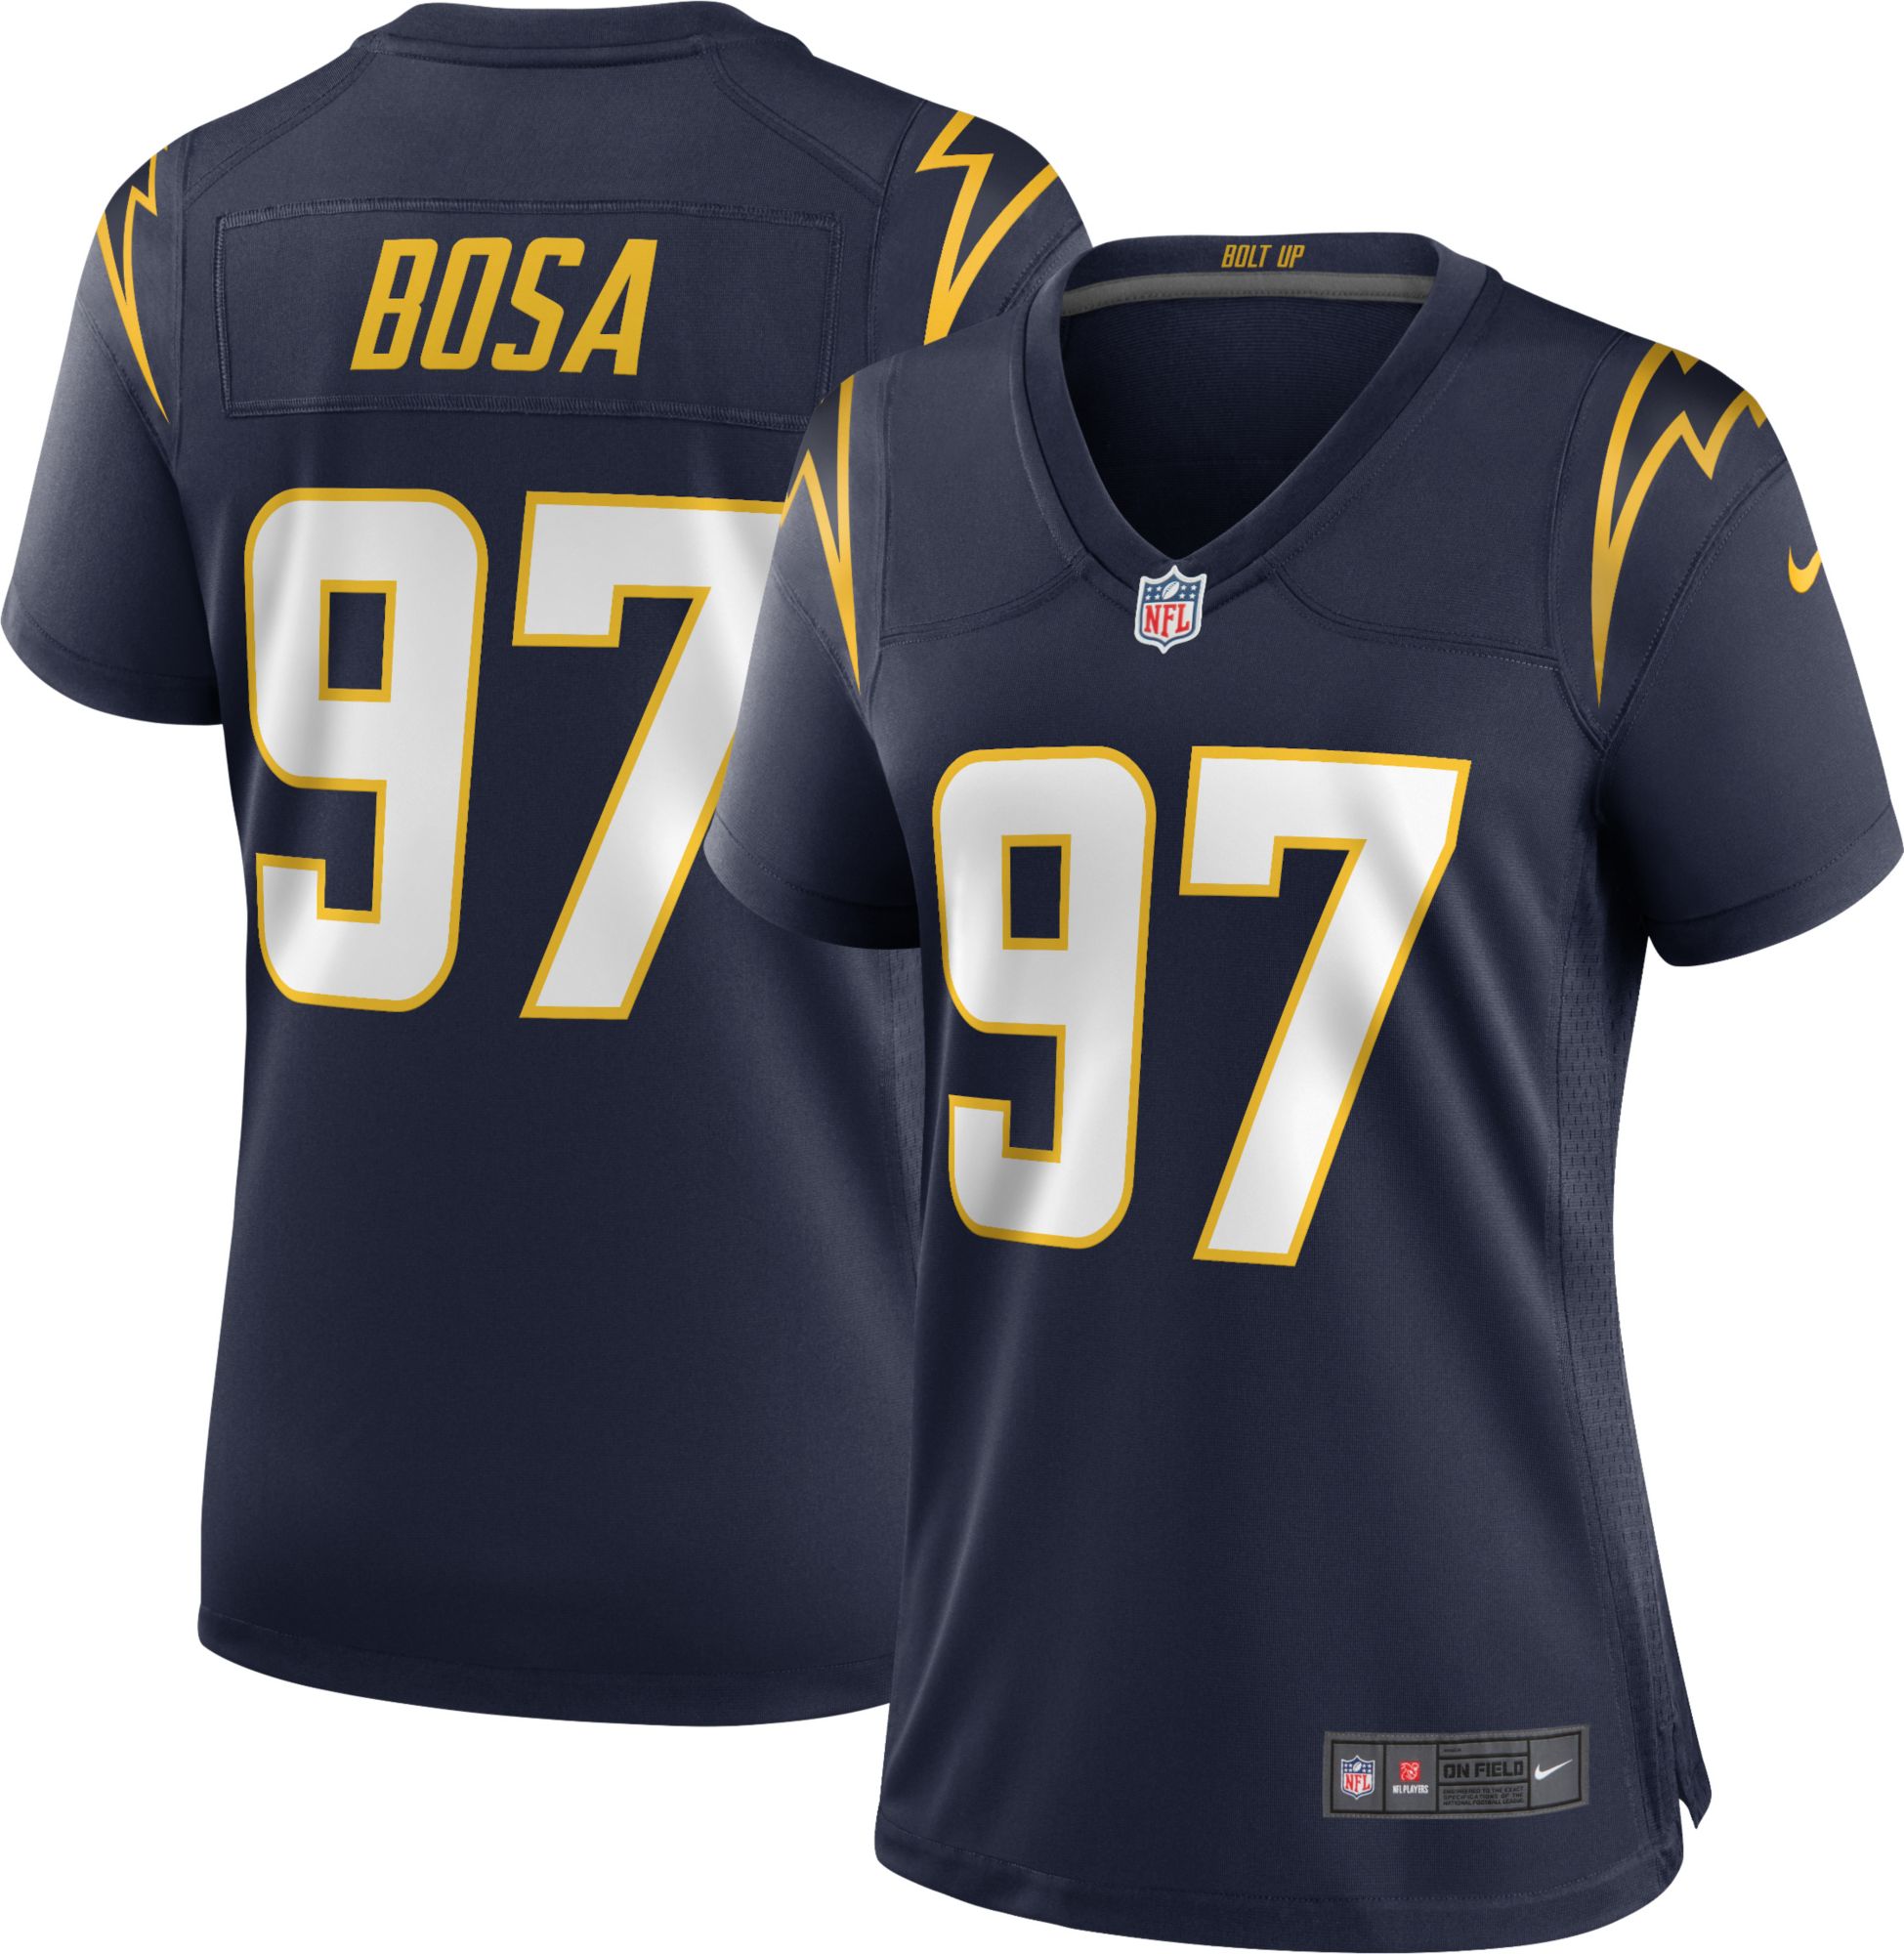 chargers women's jersey